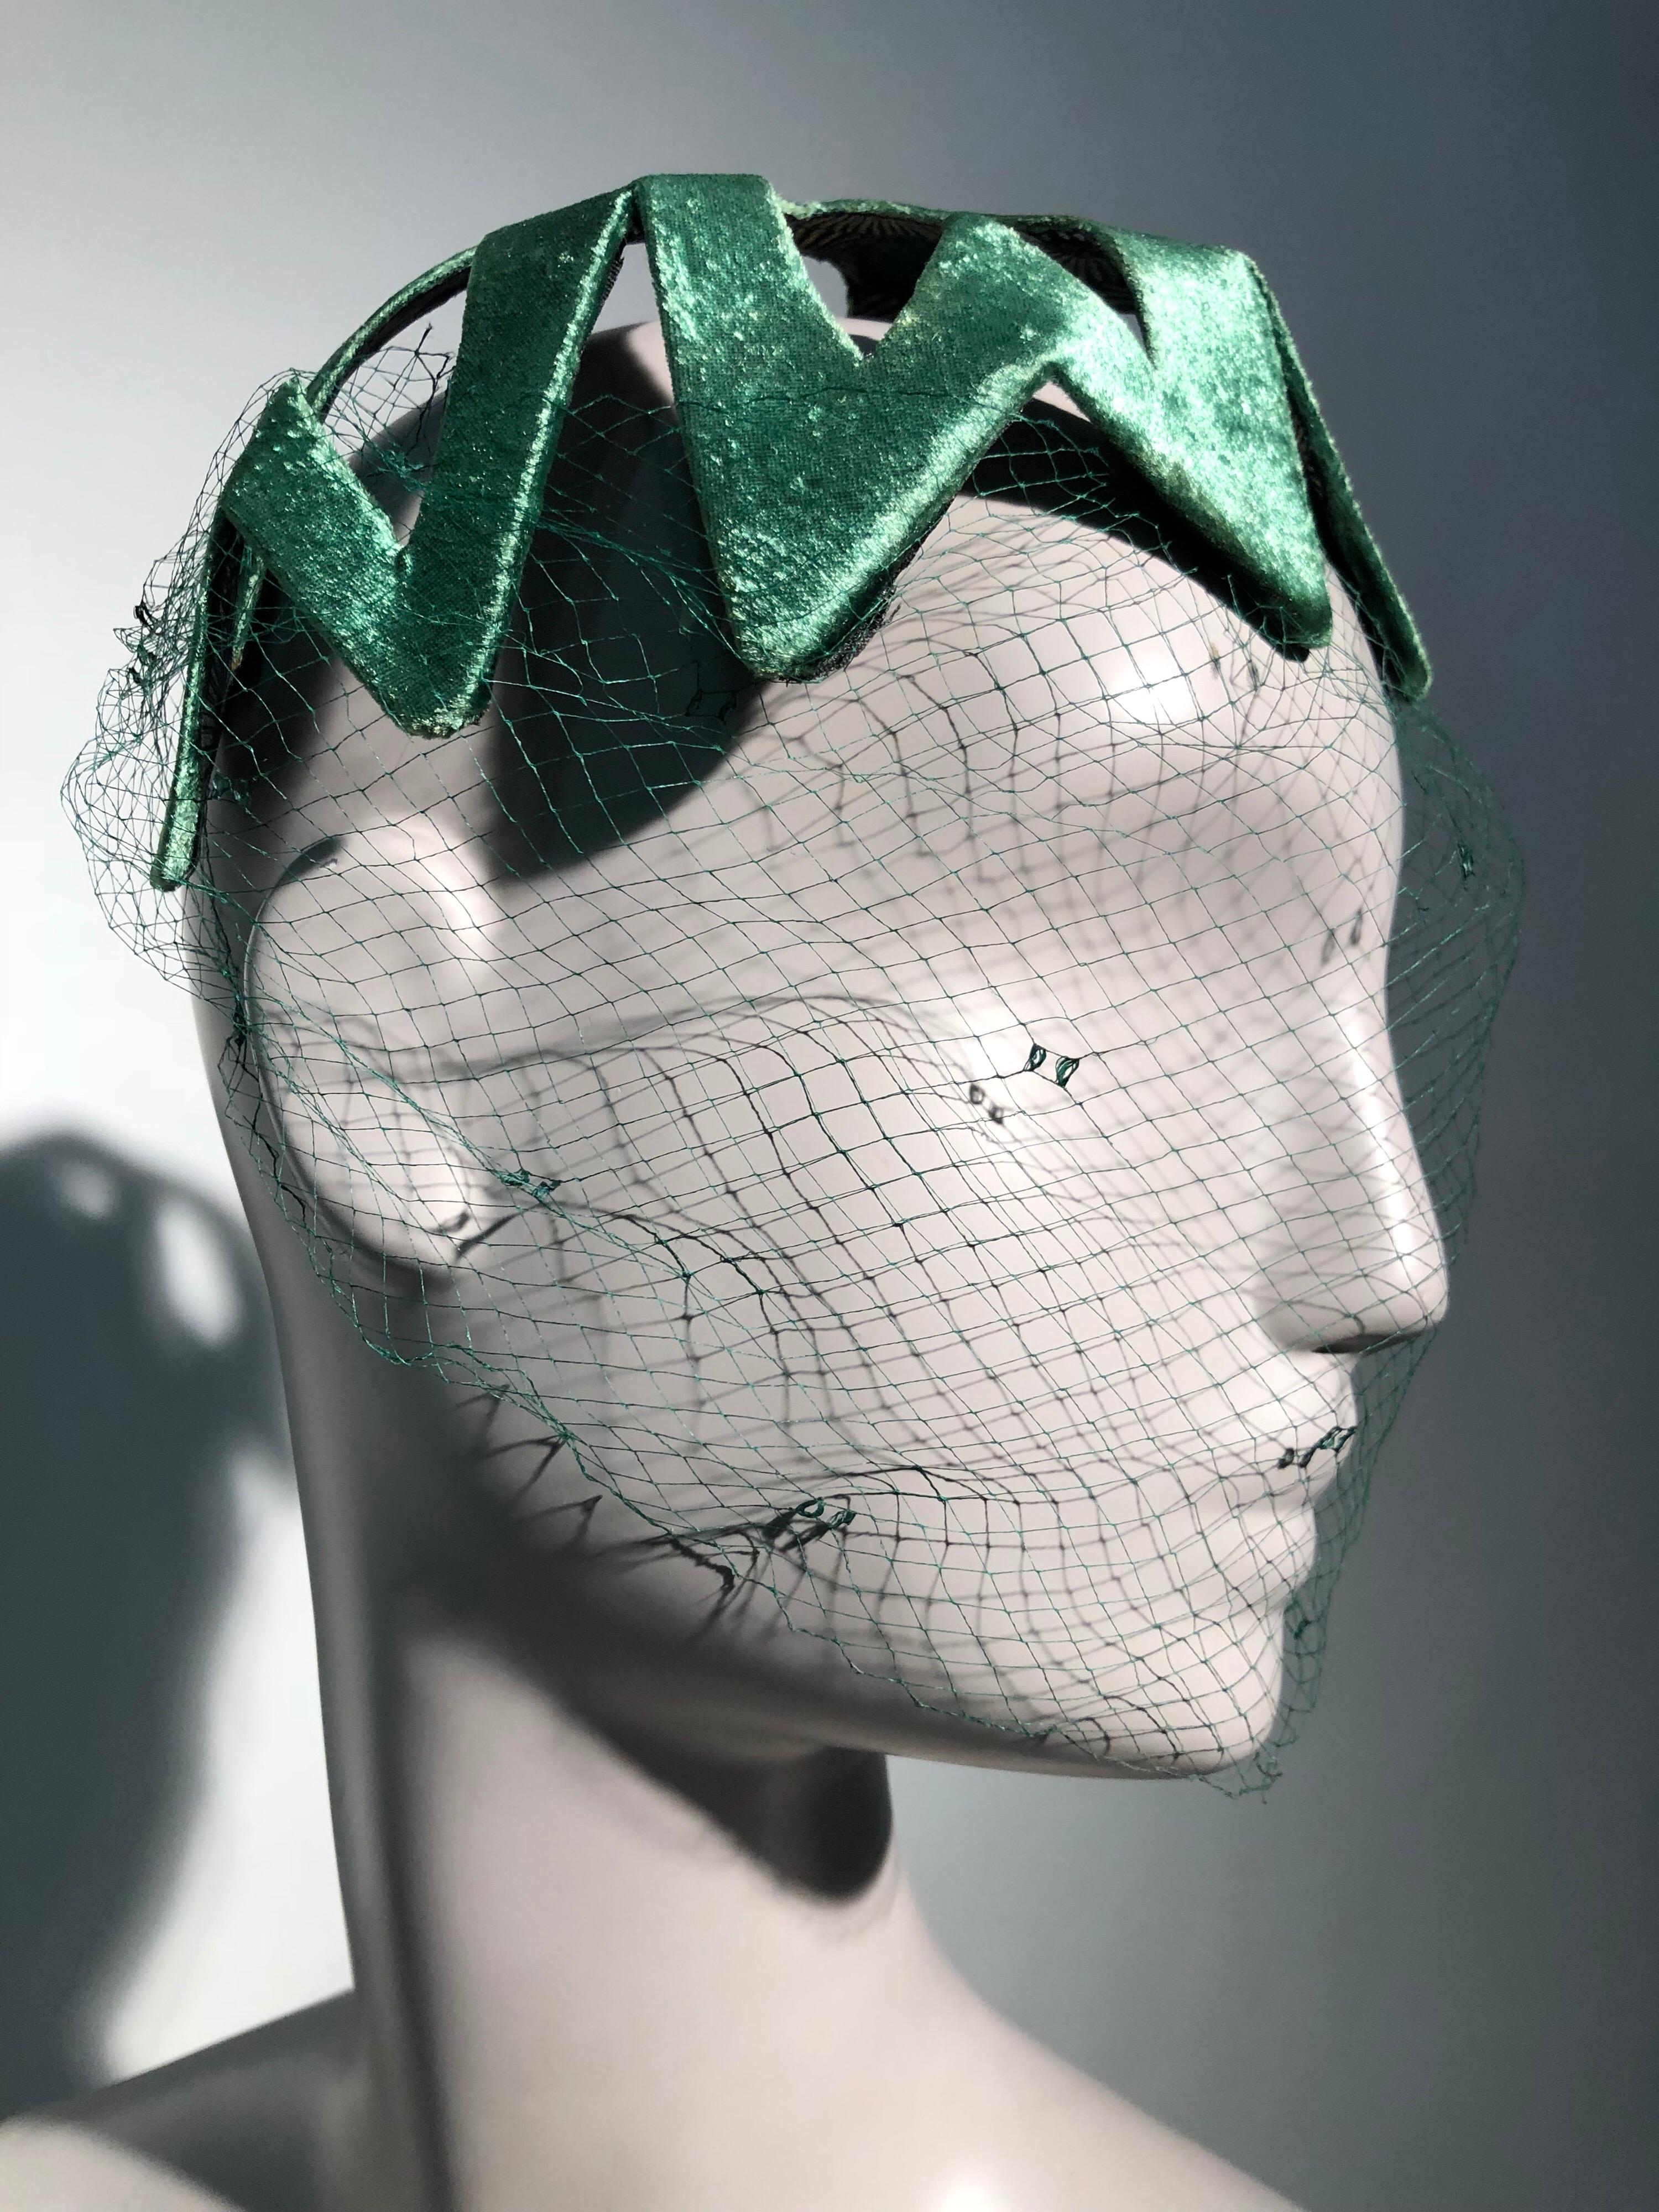 A fabulous 1950s statement hat, most likely from Japan. This emerald green satin stunner is stiffened and molded to fit the front of the head and is lined with a traditional Japanese chrysanthemum pattern. You'll love this bold graphic cut-out